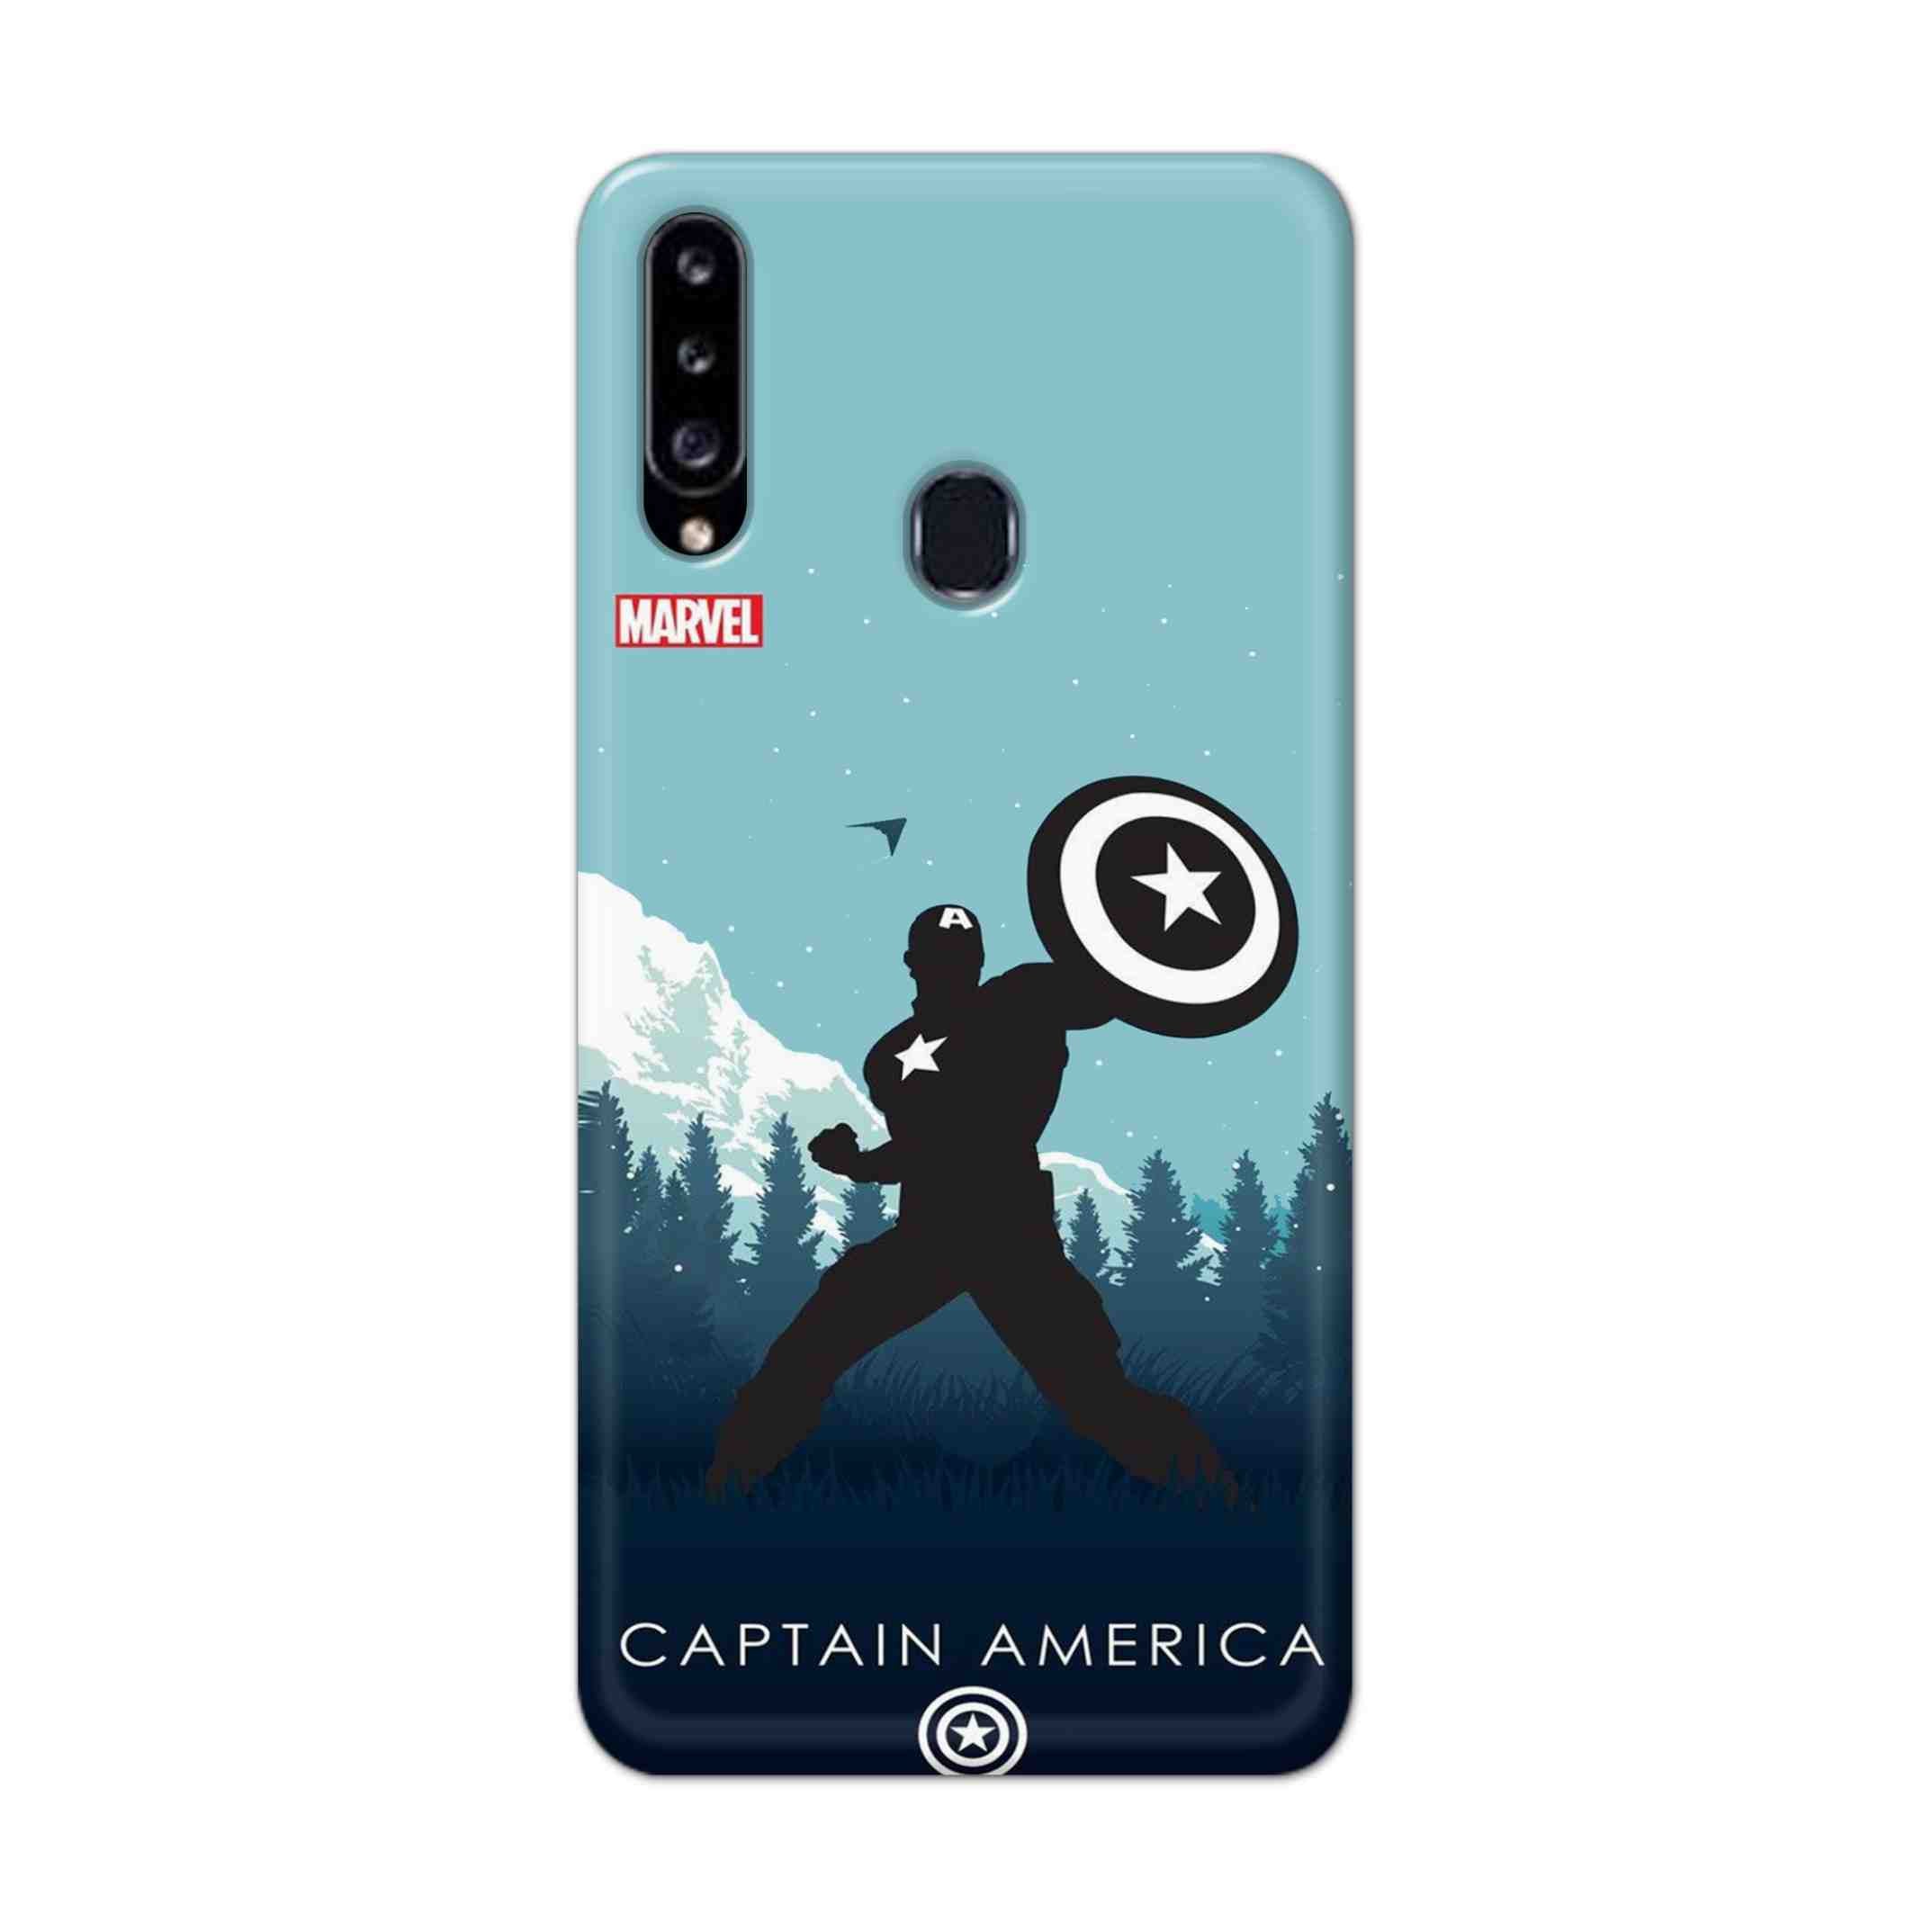 Buy Captain America Hard Back Mobile Phone Case Cover For Samsung Galaxy A21 Online